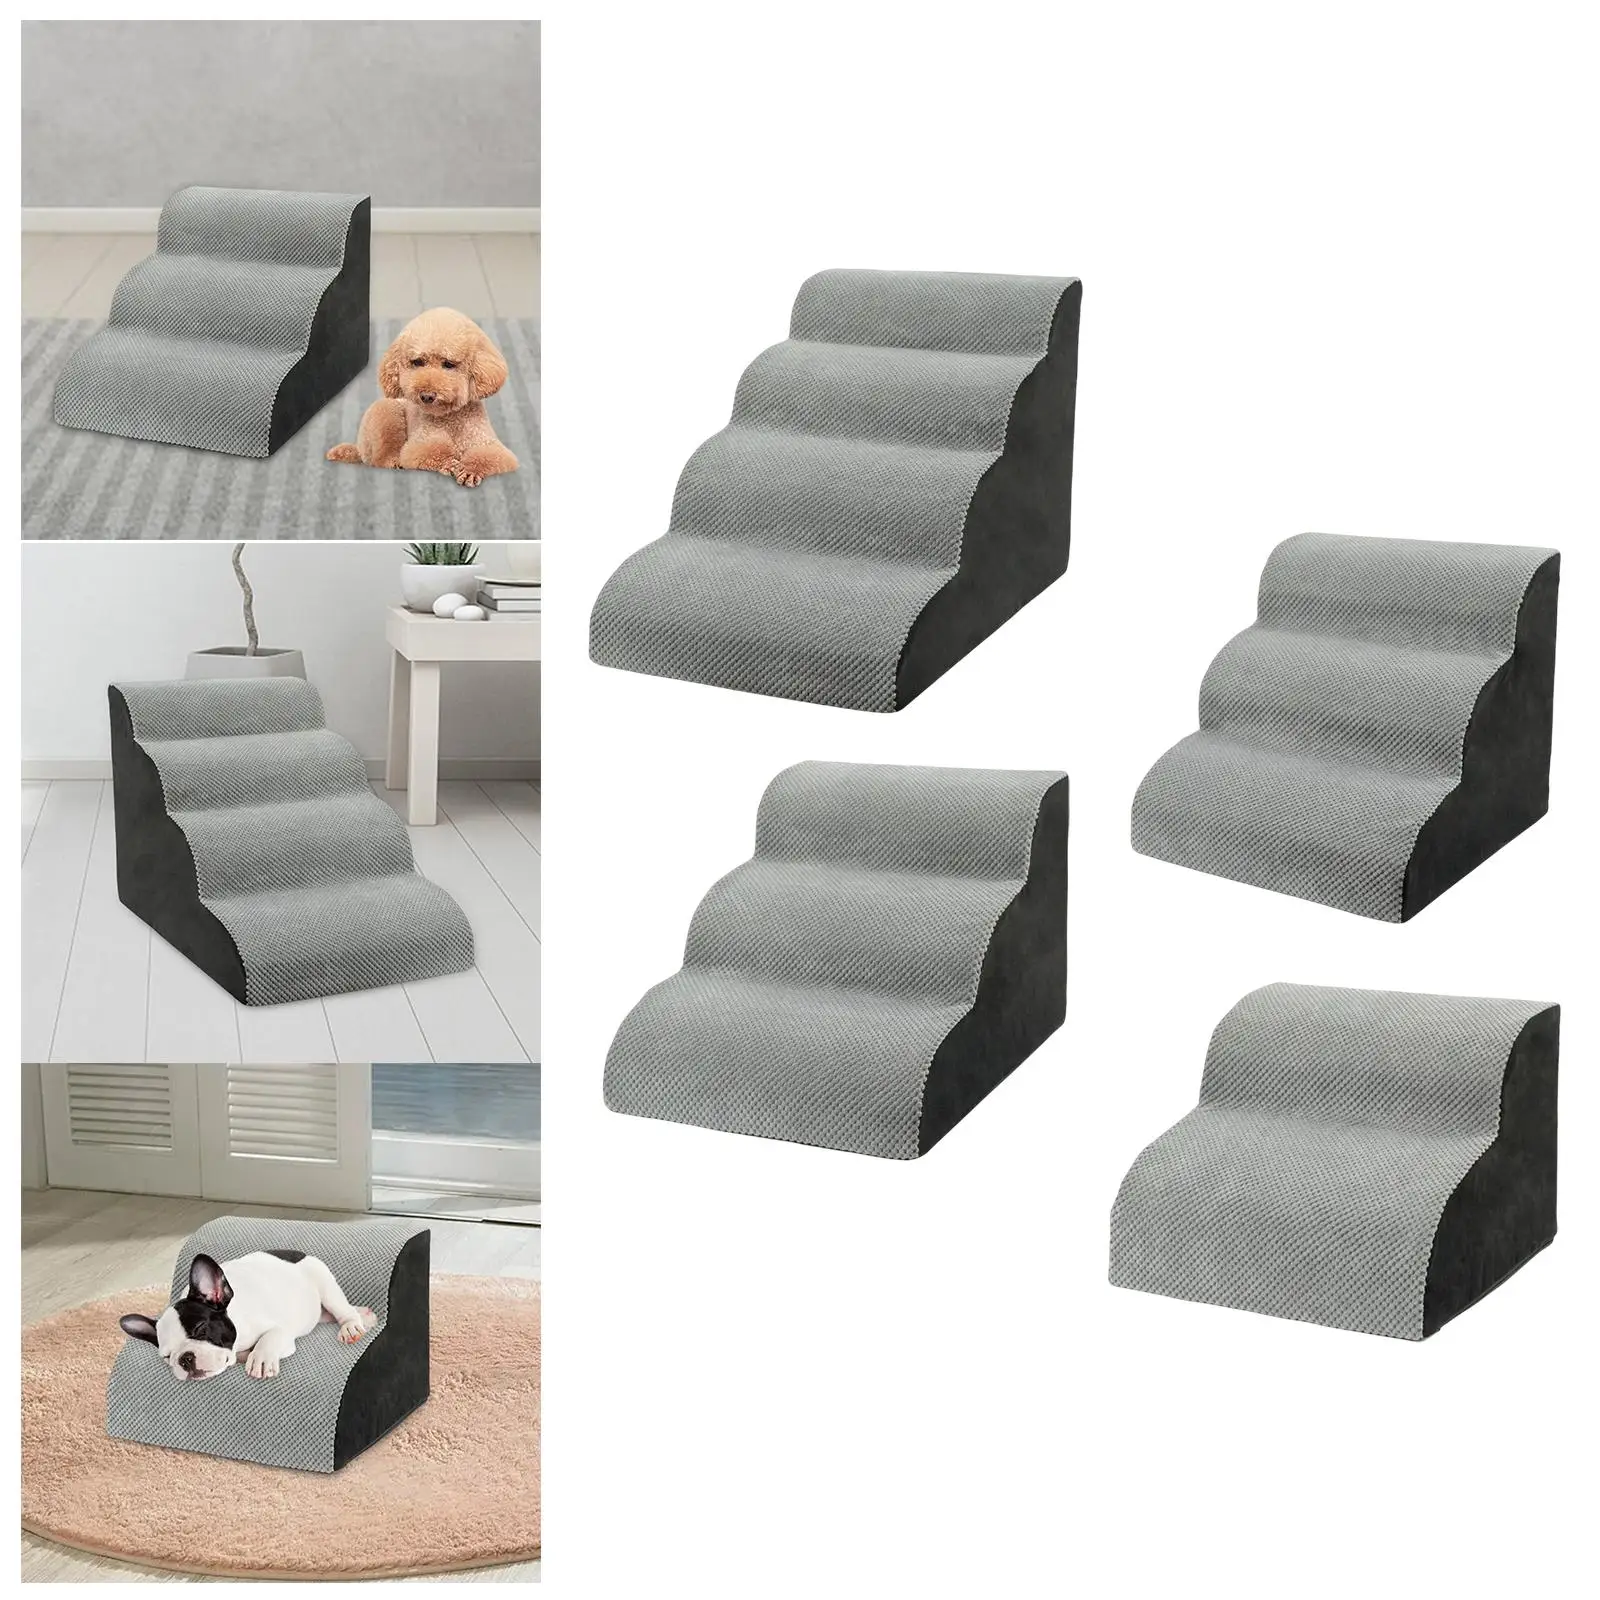 Comfortable Dog Stairs Pet Ladder Ramp Climbing Detachable Cover Extra Wide Slope Dog Bed Stairs Indoor Cats Pets High Bed